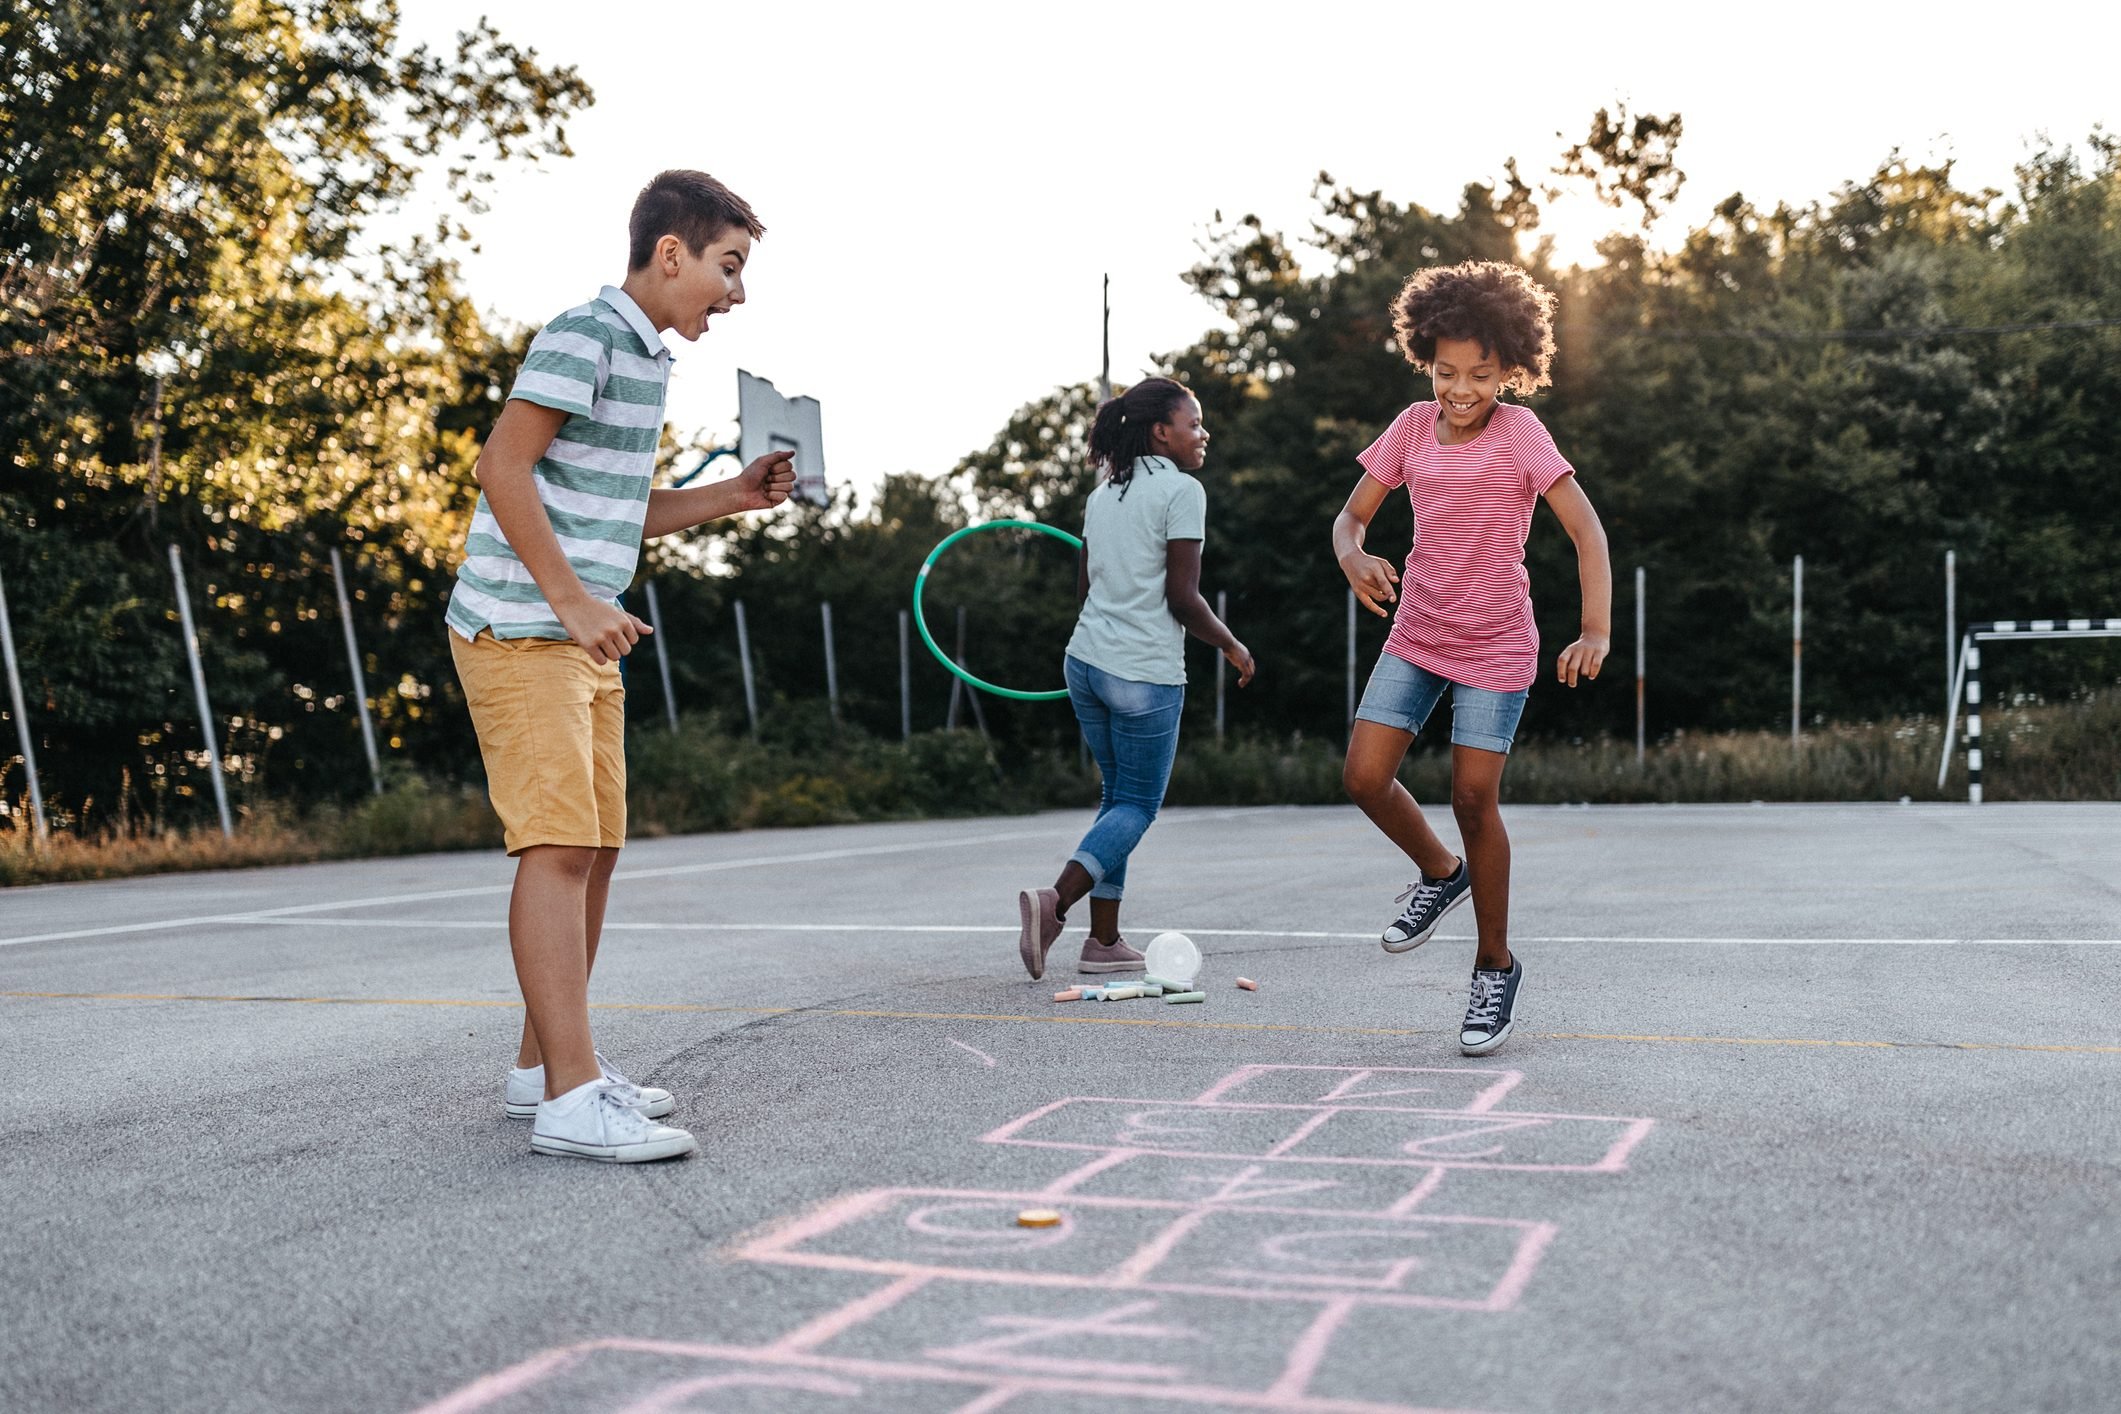 Mother holding plastic hoop while children playing hopscotch